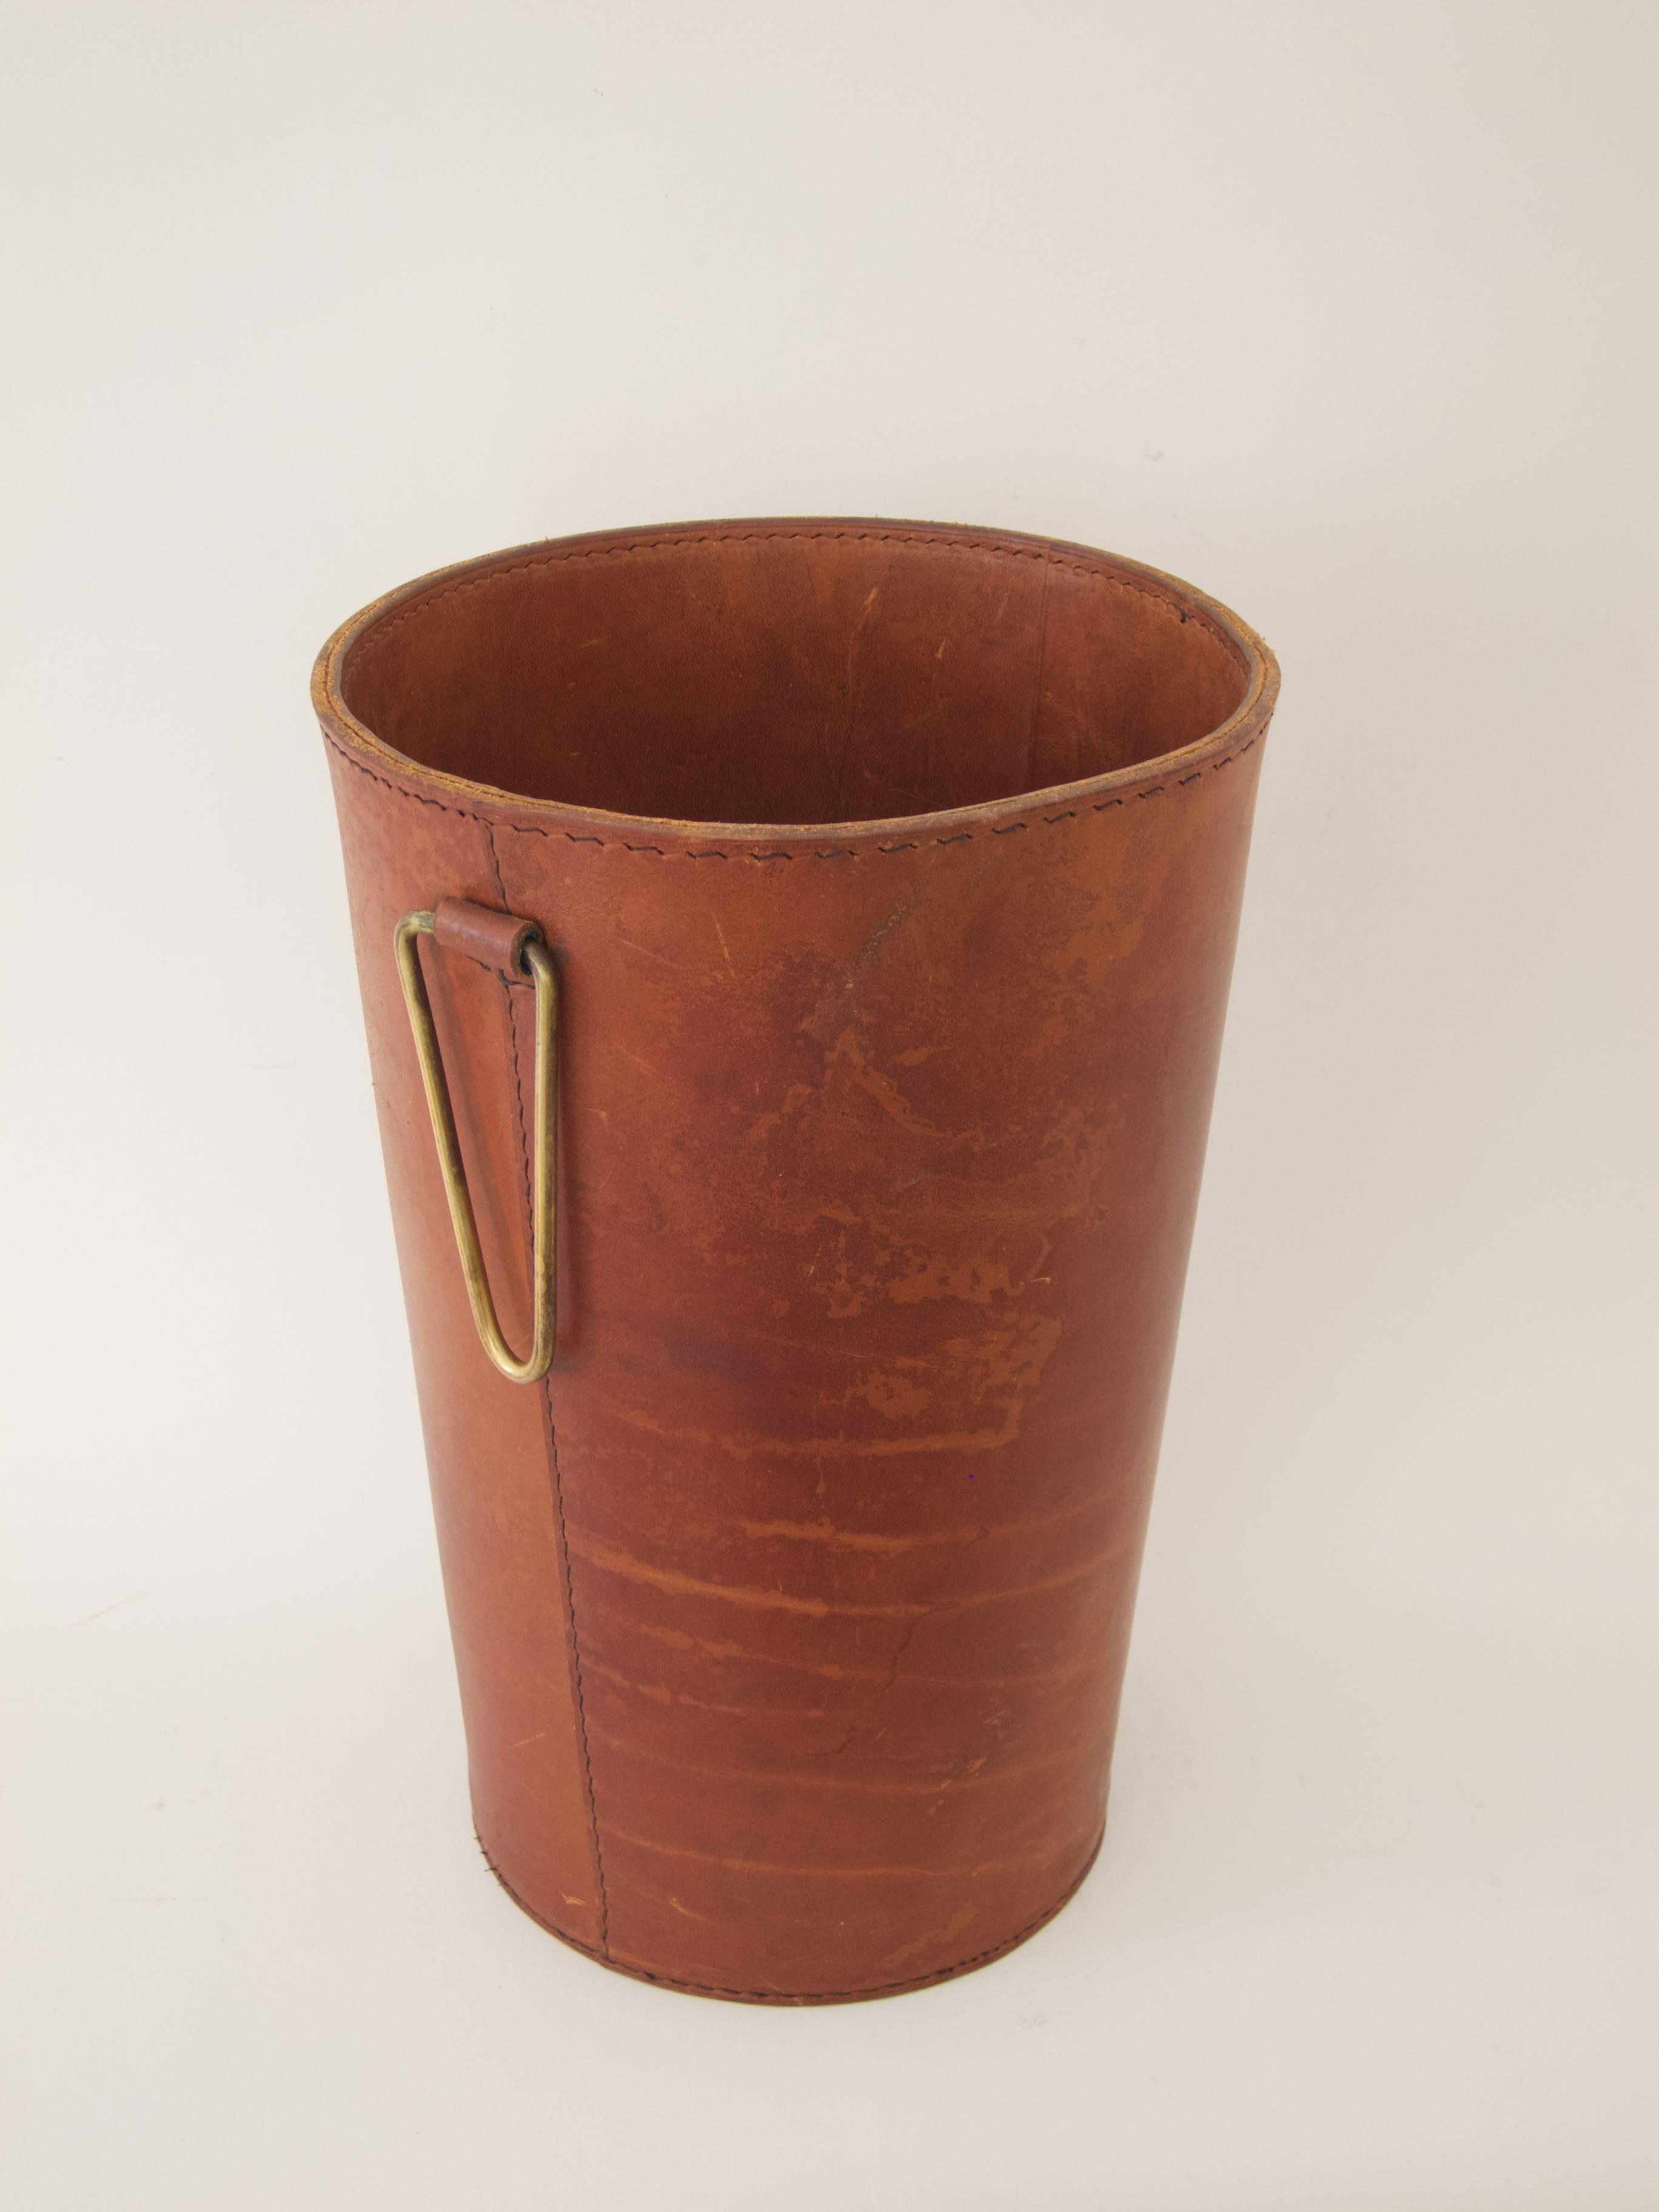 Very elegant, leather wastepaper basket by Carl Auböck.
Can also be used for hanging it on a hook on the desk or on the C. Auböck wardrobe.
Marked: MADE IN AUSTRIA
Good condition with a nice patina.